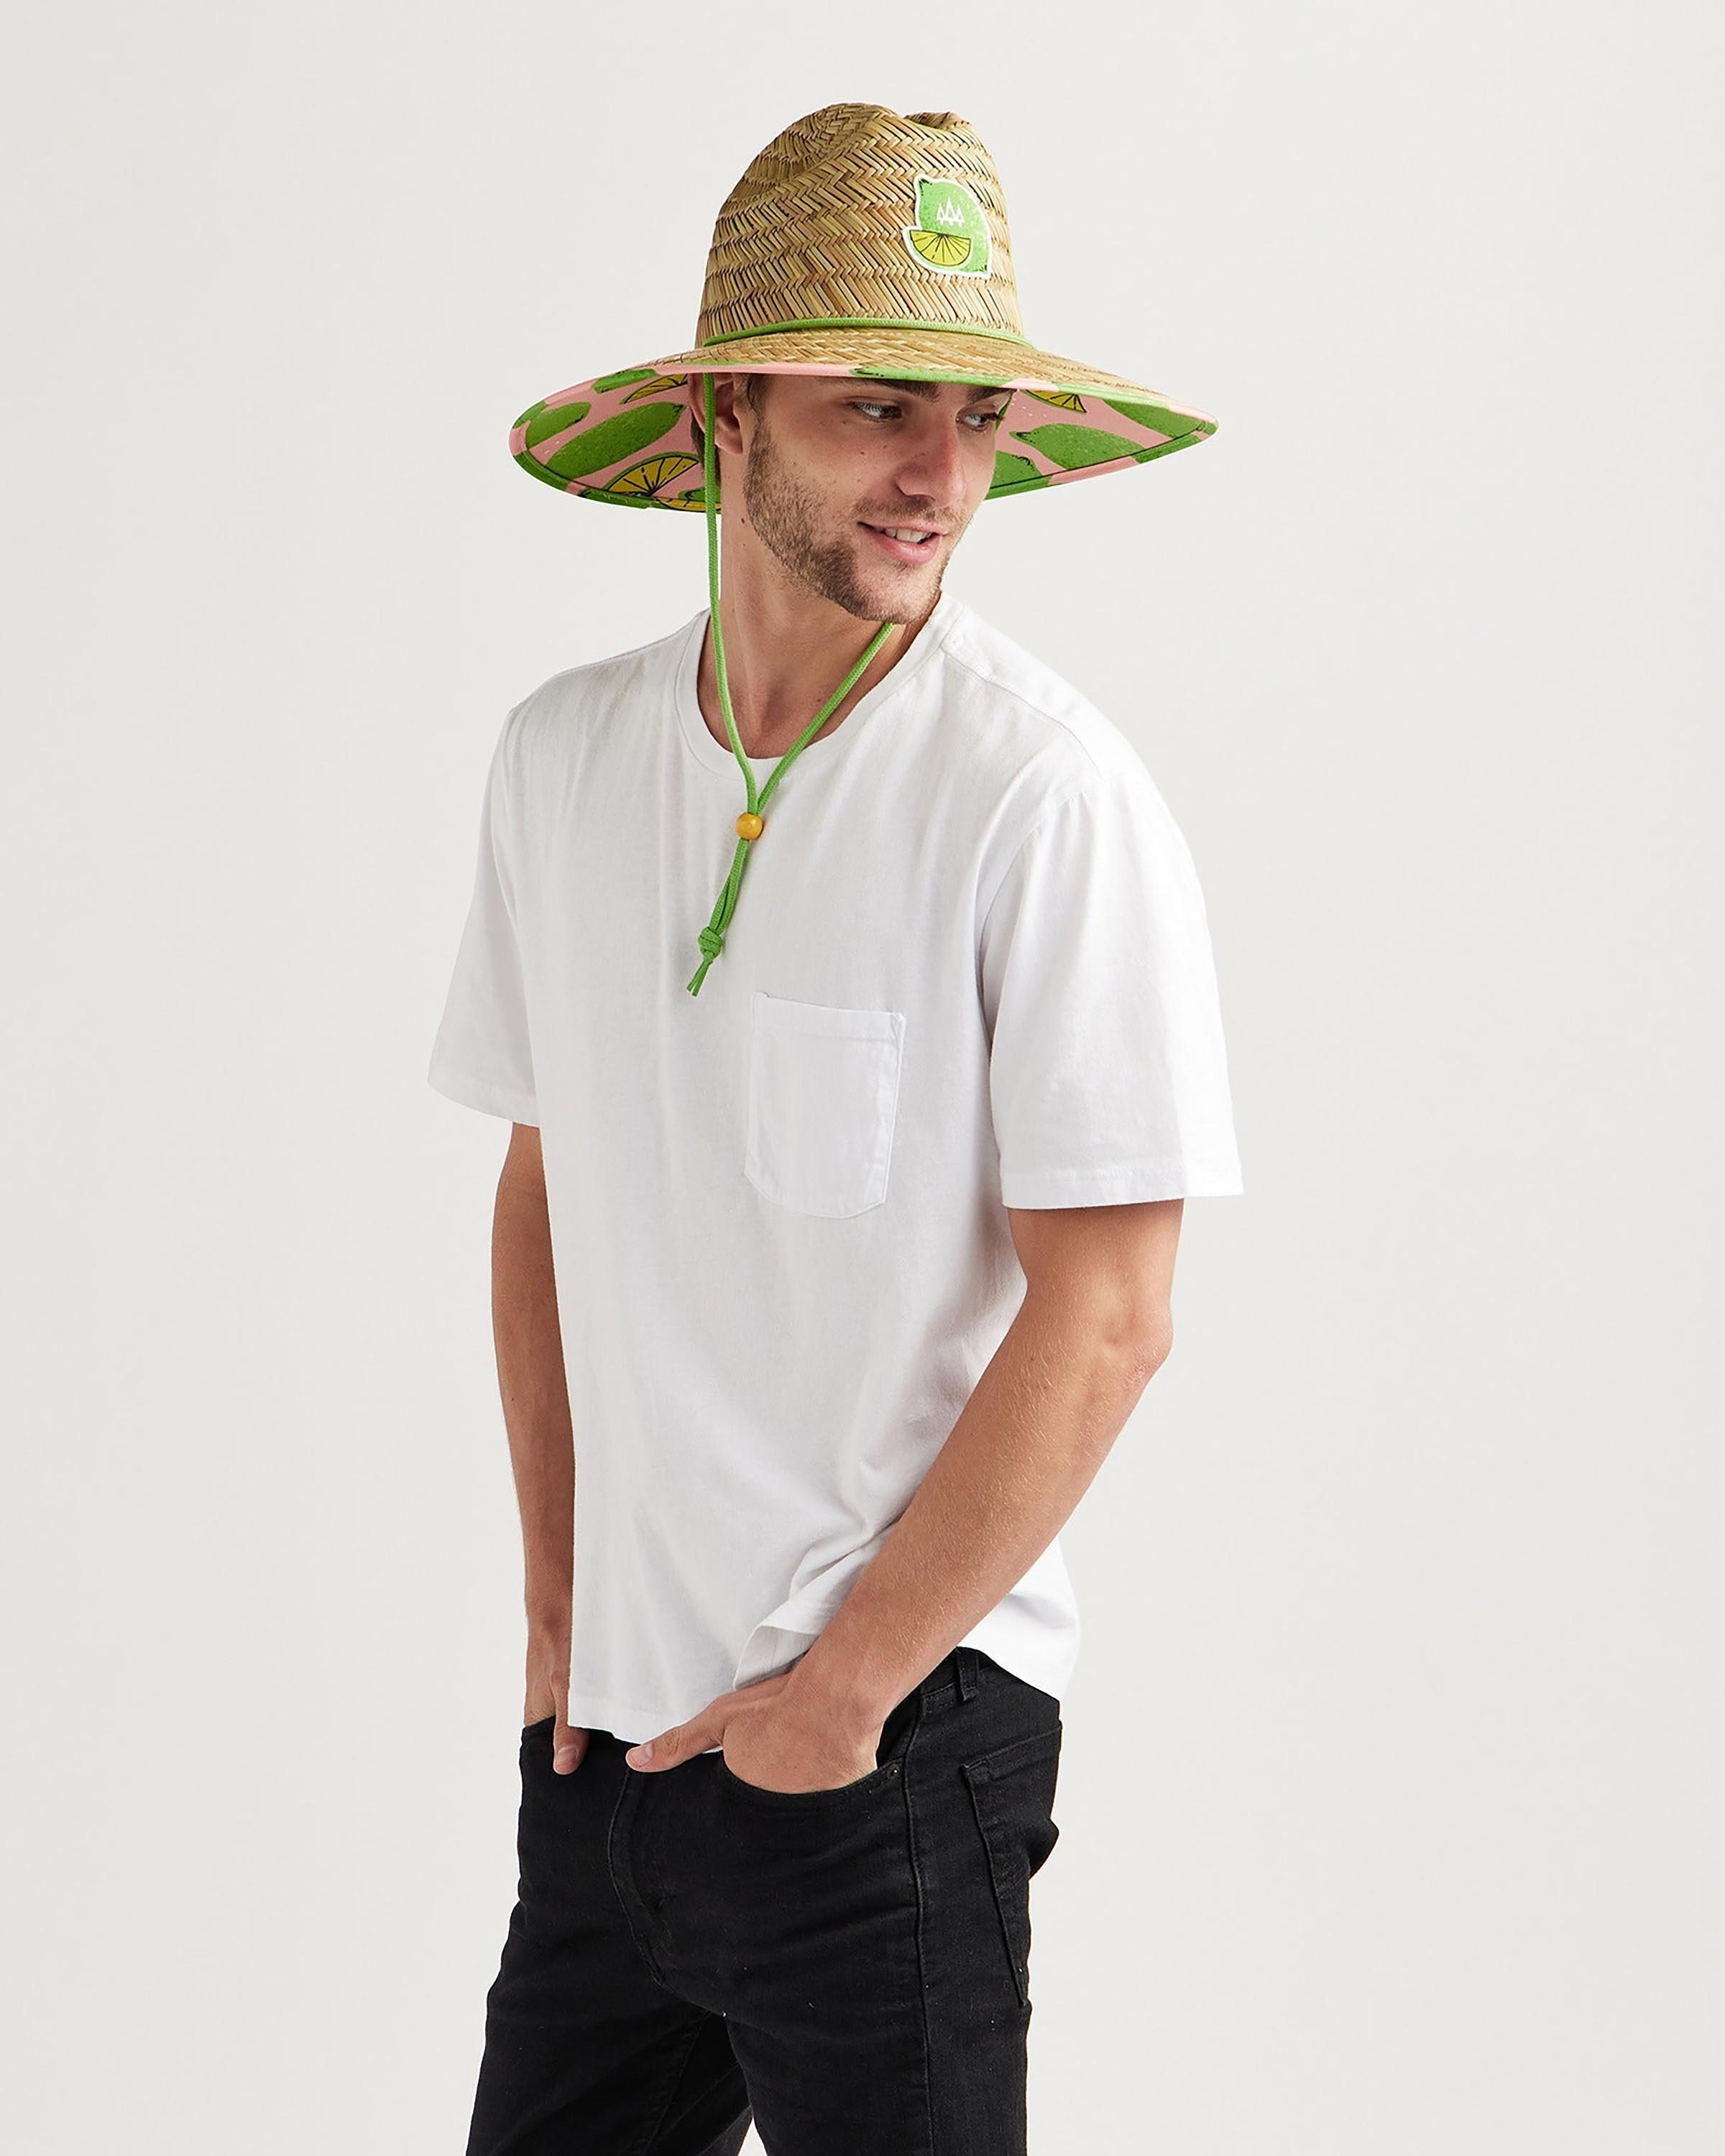 Hemlock male model looking right wearing Cadillac straw lifeguard hat with lime pattern